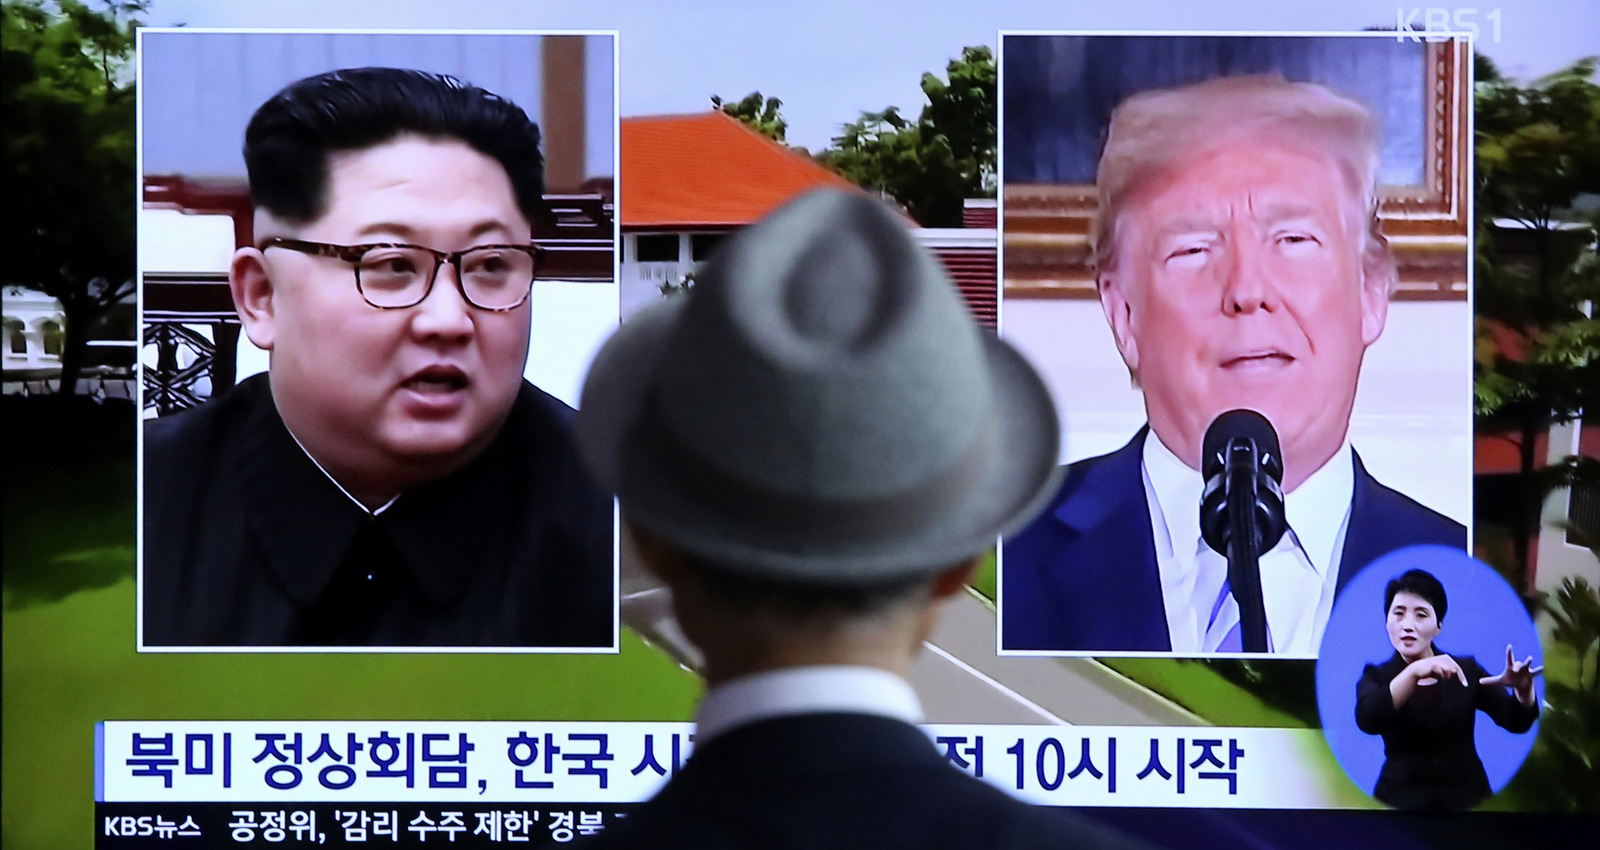 A man watches a TV screen showing file footage of U.S. President Donald Trump, right, and North Korean leader Kim Jong Un during a news program at the Seoul Railway Station in Seoul, South Korea, Monday, June 11, 2018. Ahn Young-joon | AP